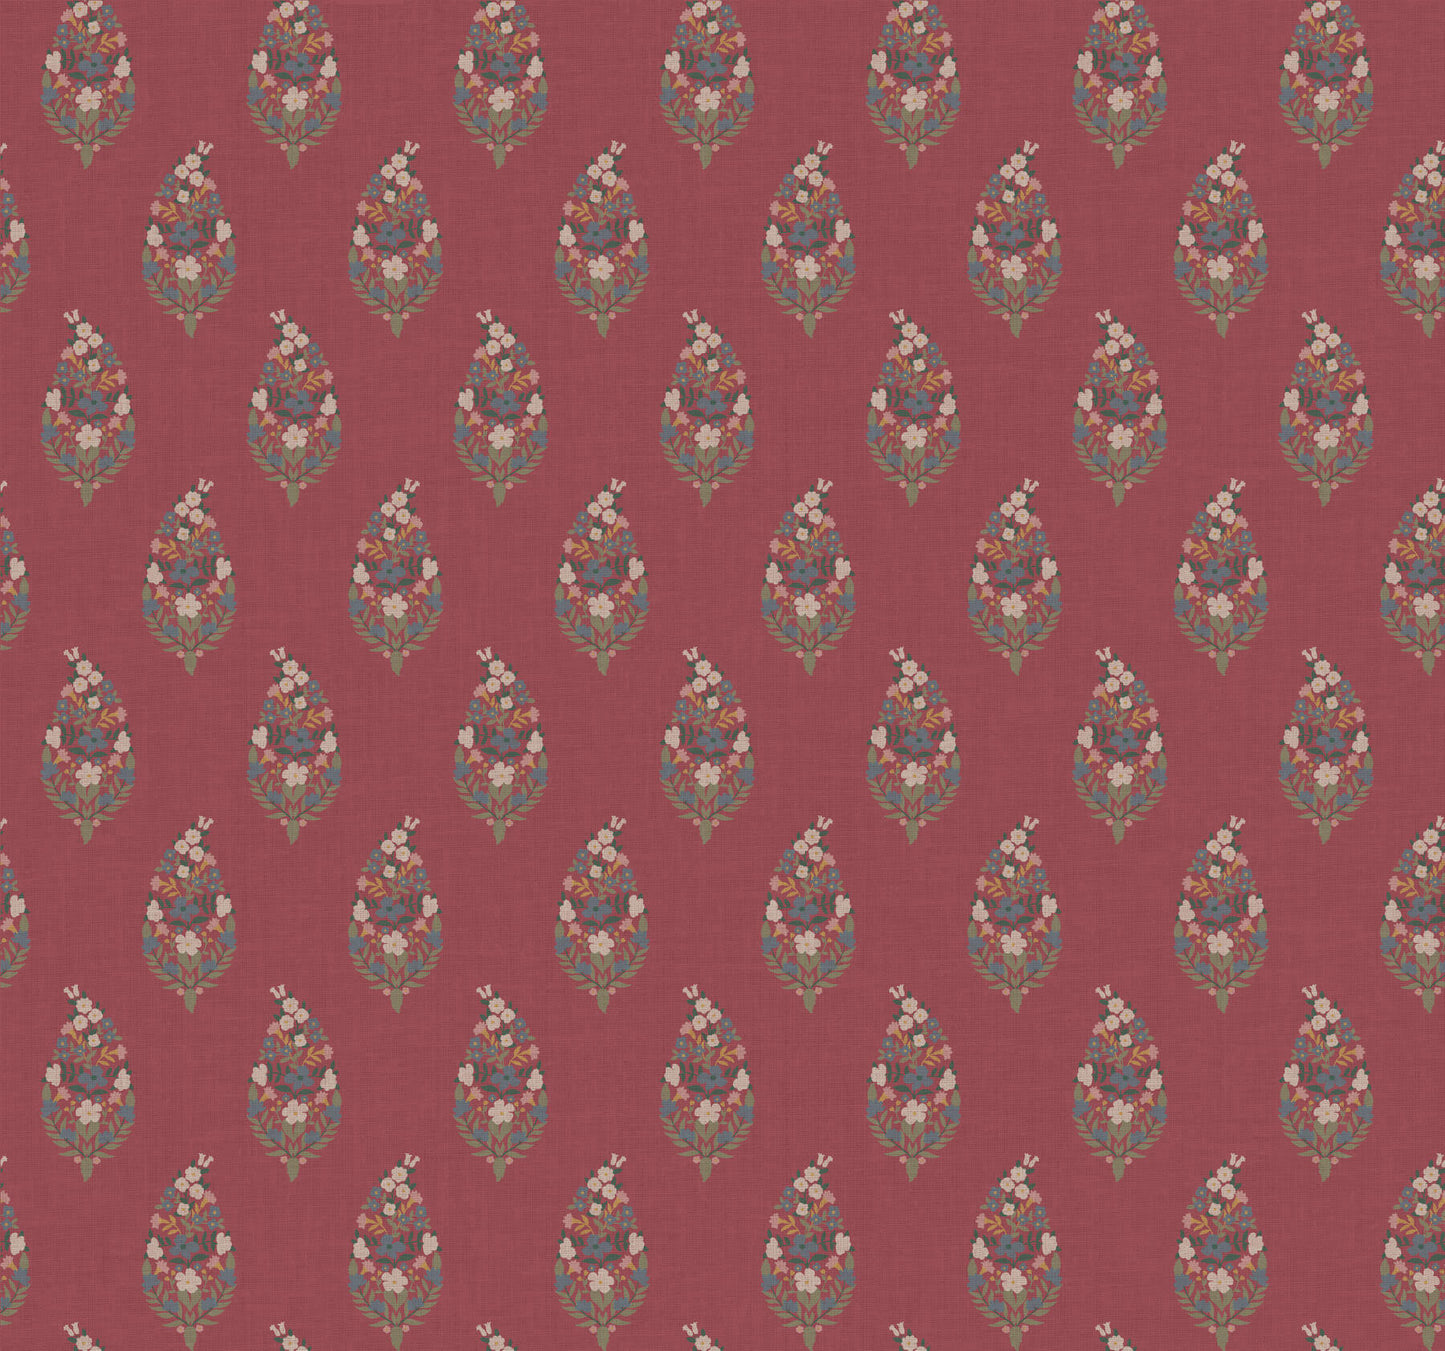 Rifle Paper Co. 3rd Edition Paisley Wallpaper - Burgundy